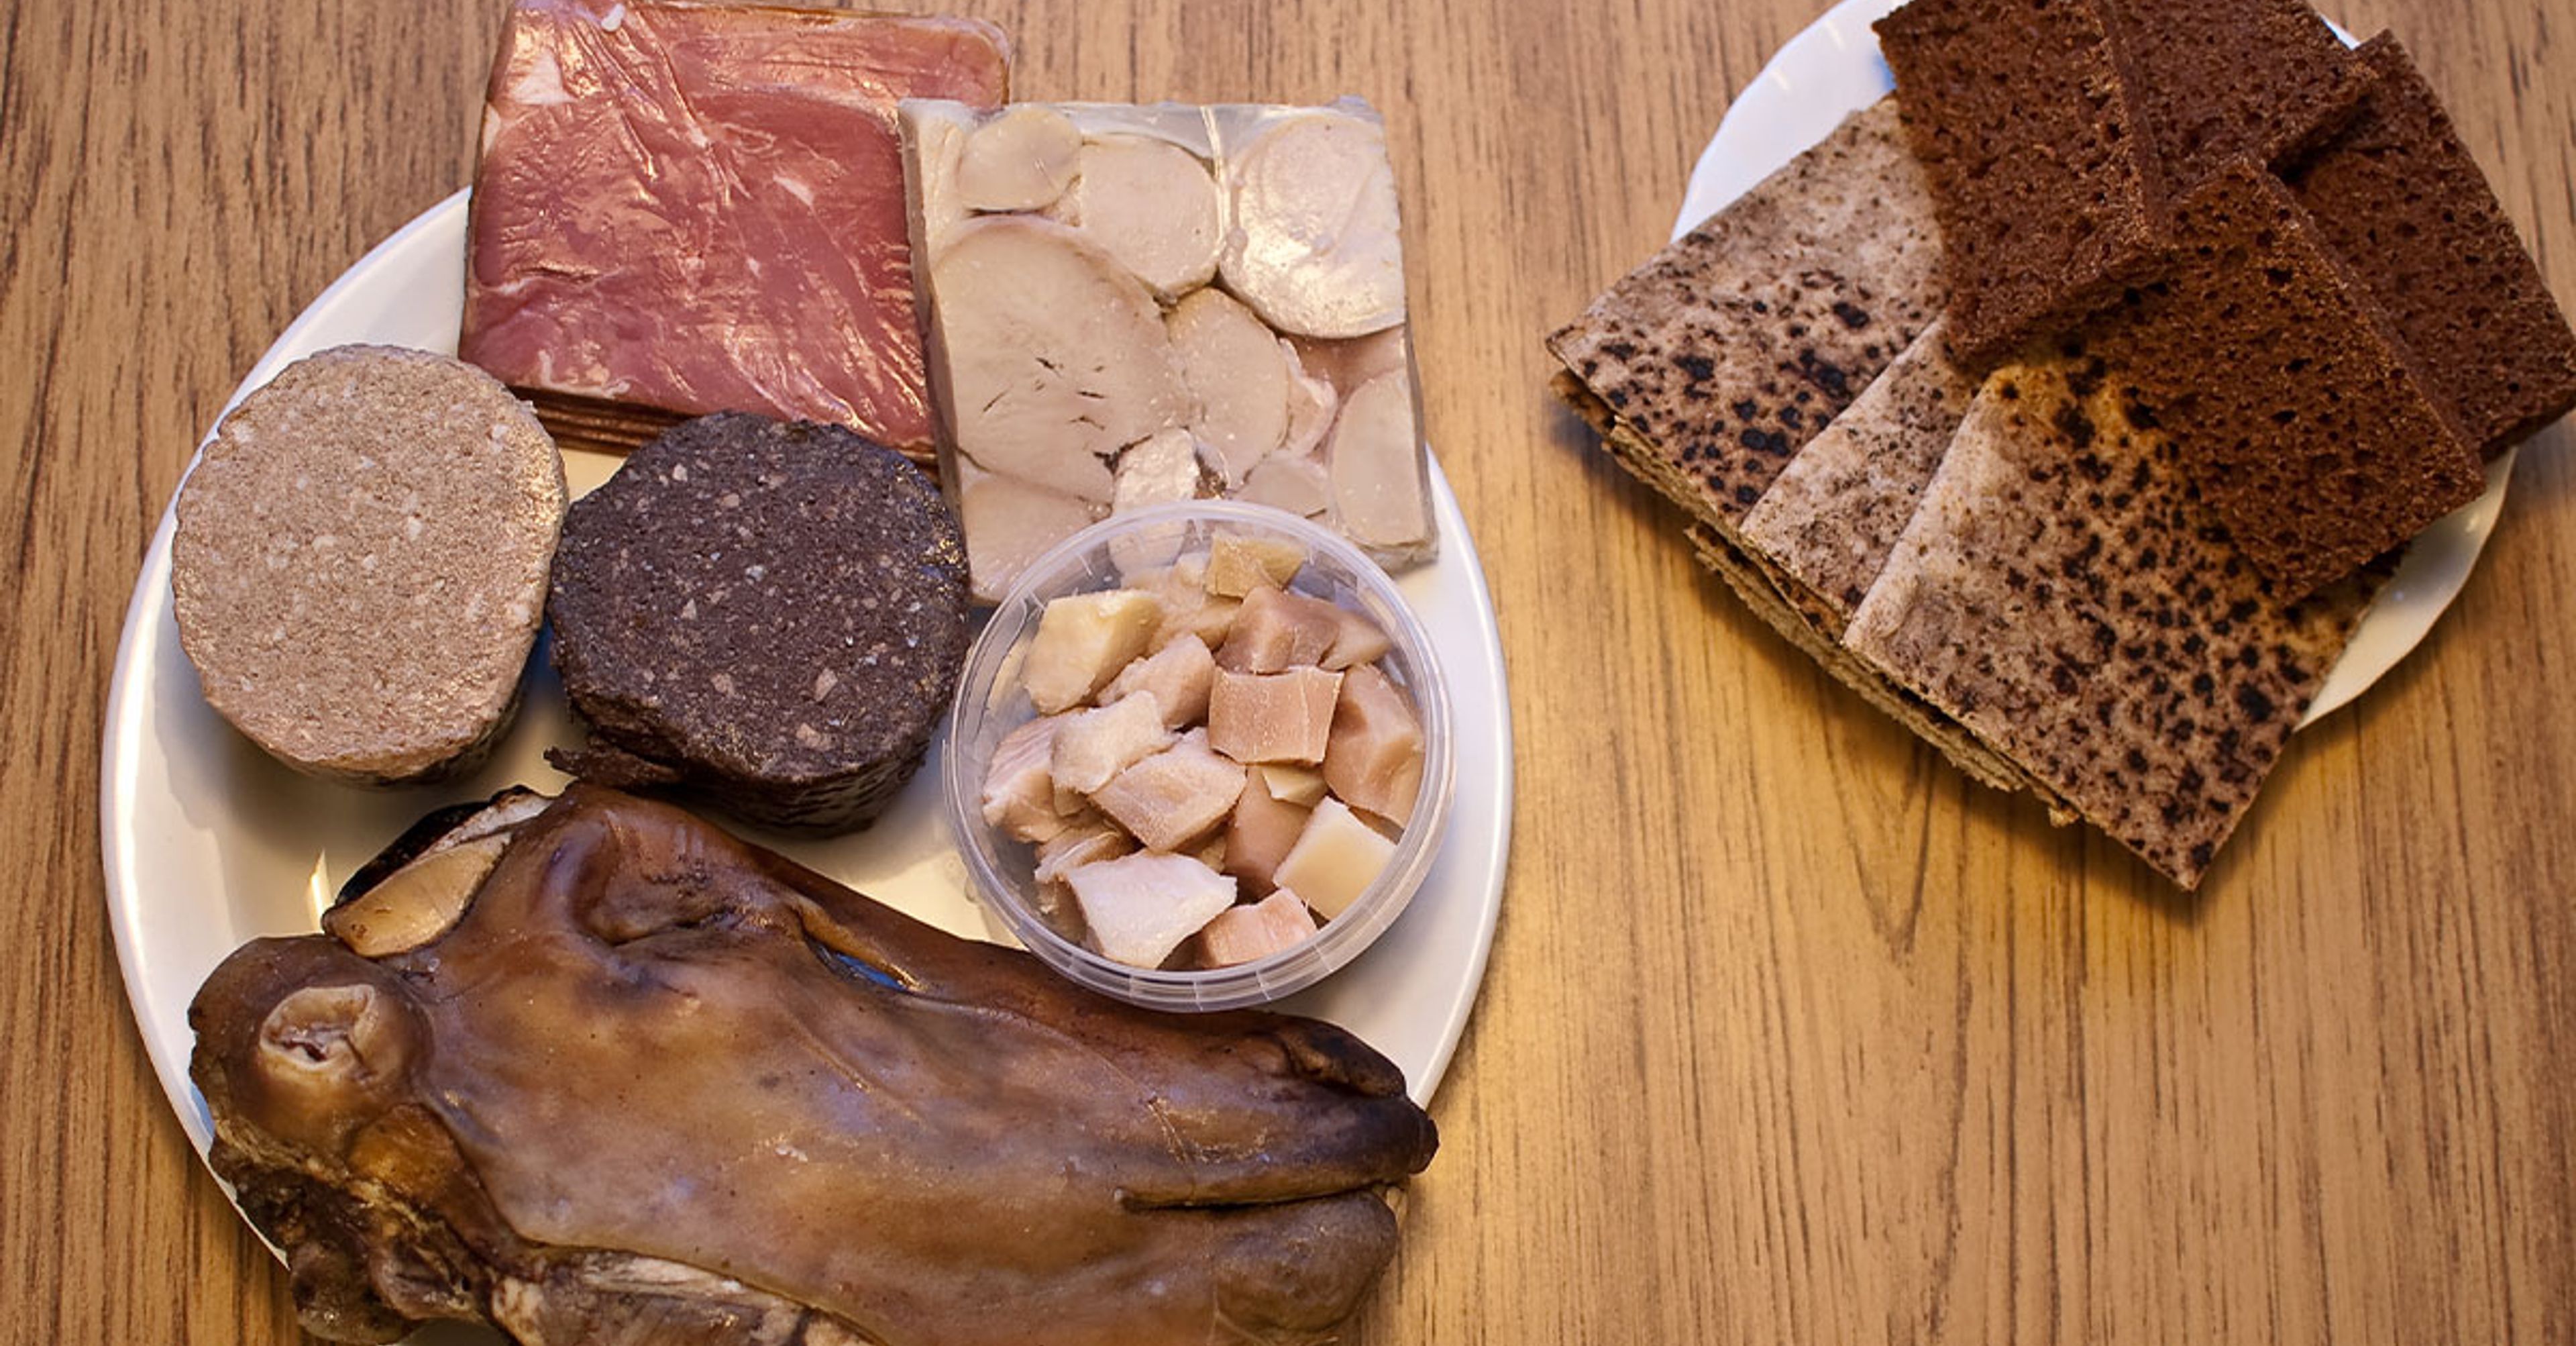 Thorrablot in Iceland food in Iceland. Sheep head, shark and more.